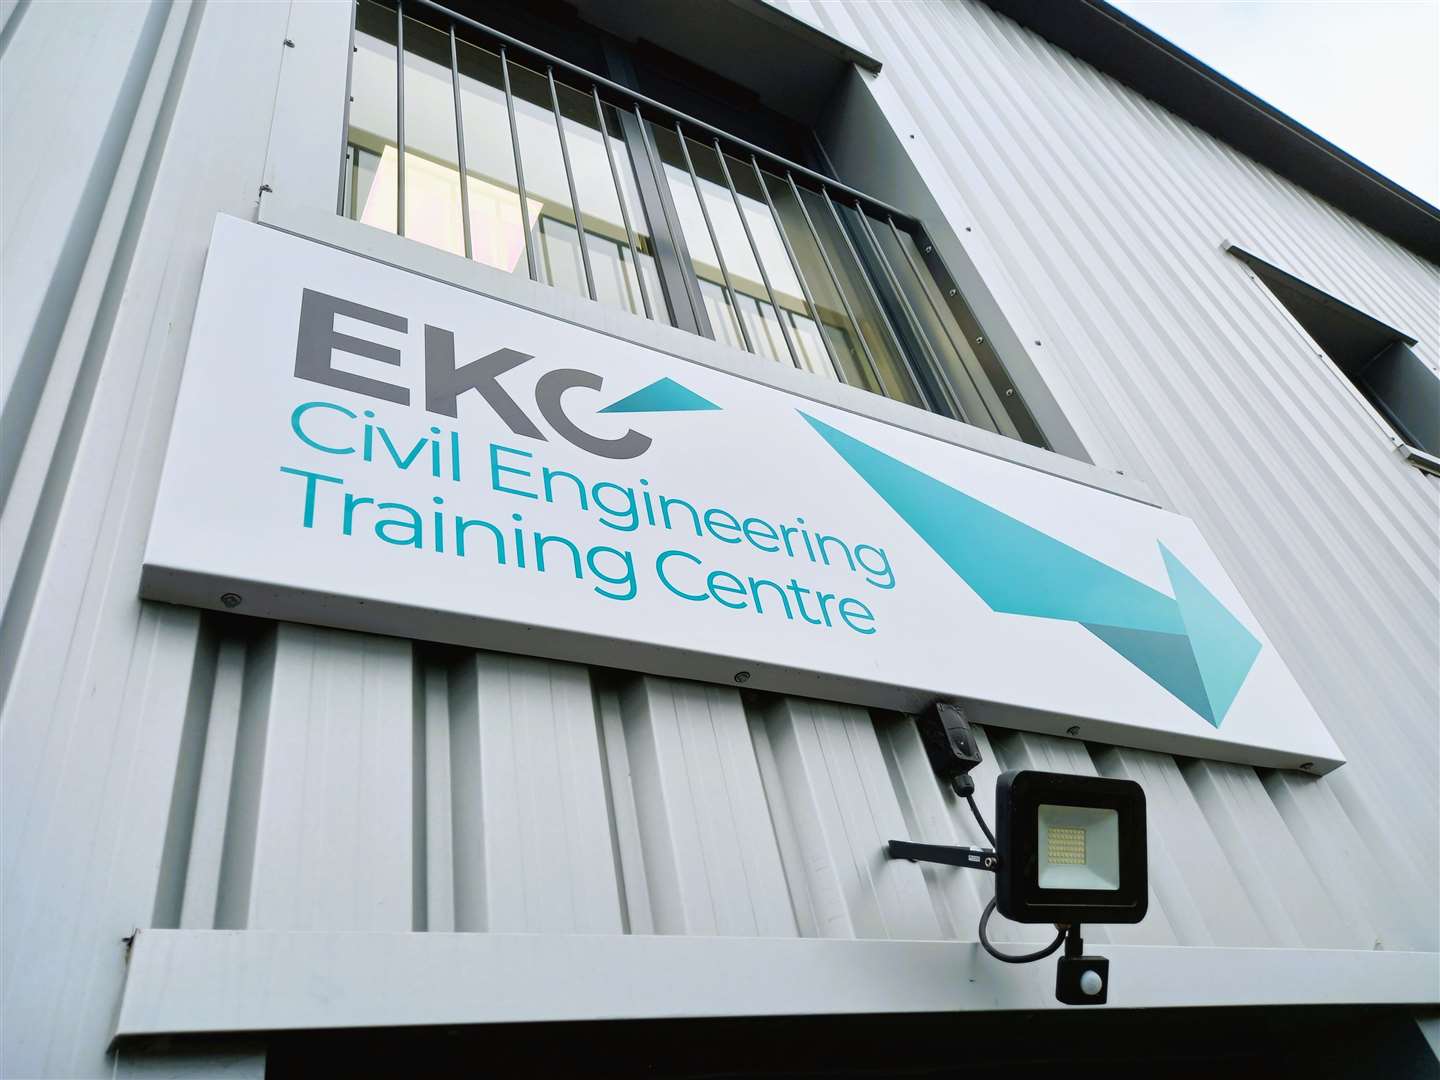 The engineering training facility has been built for East Kent College. Photo: Quinn Estates